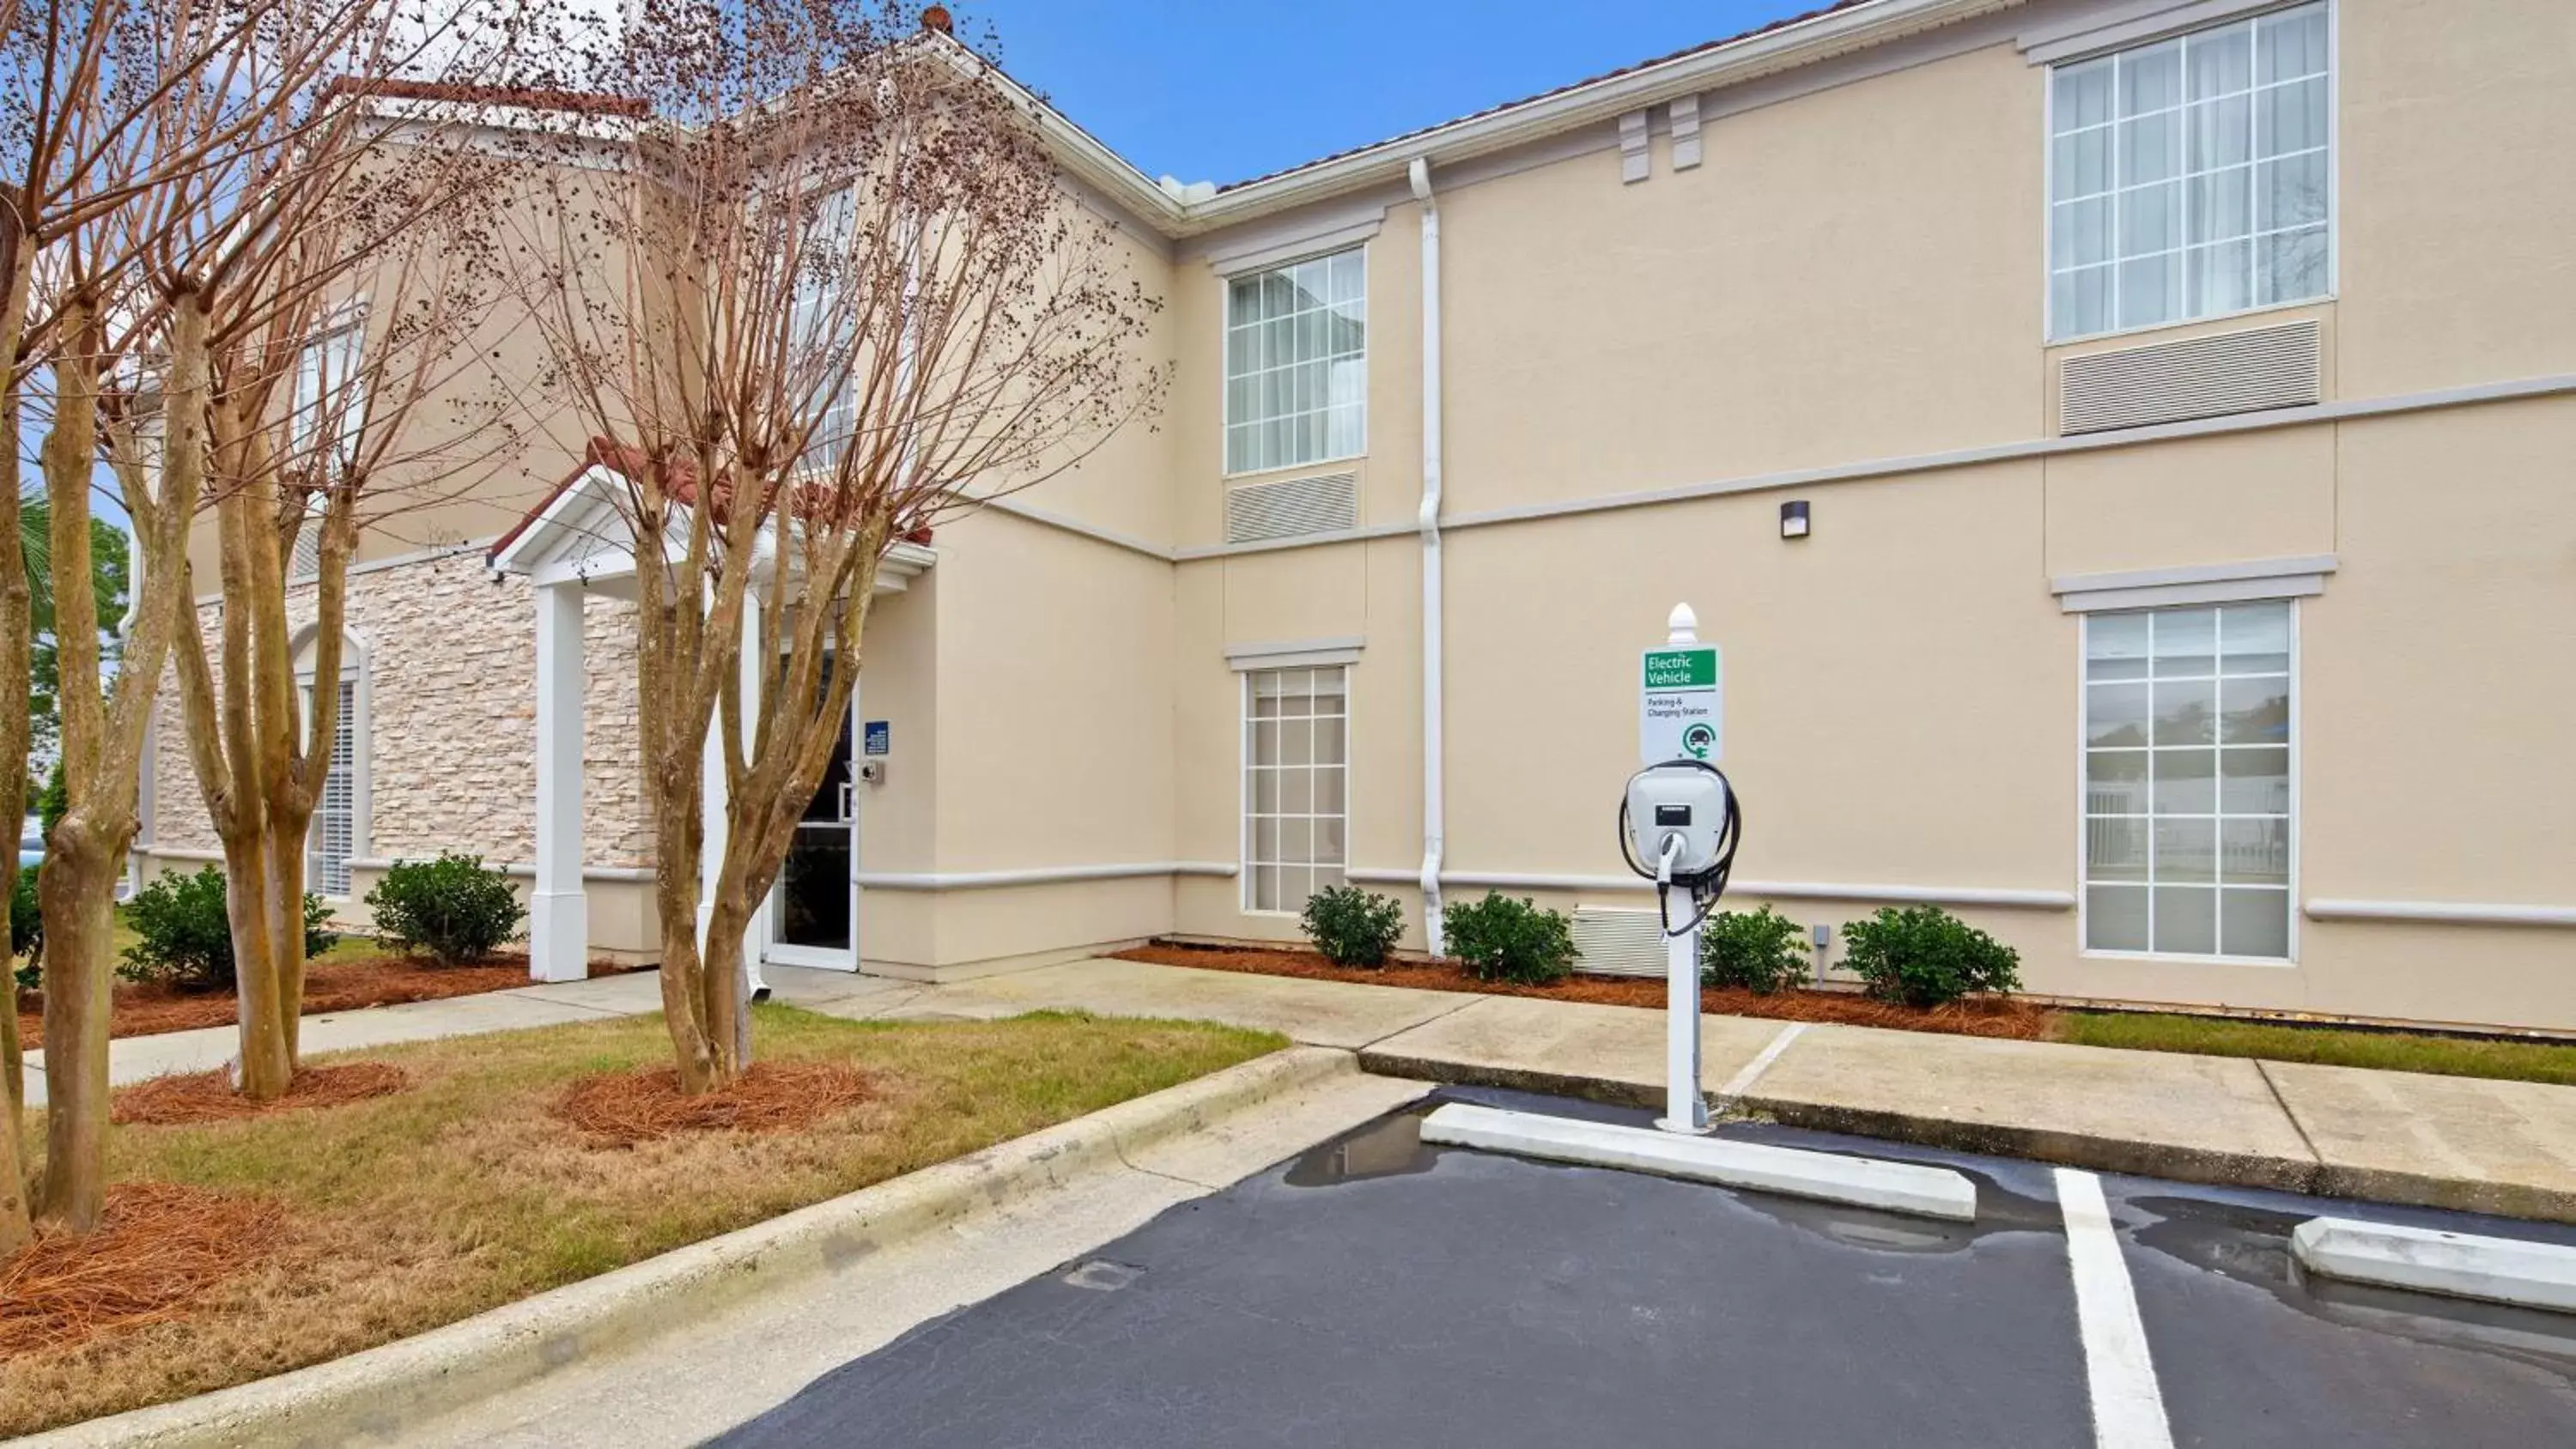 On site, Property Building in Best Western Niceville - Eglin AFB Hotel